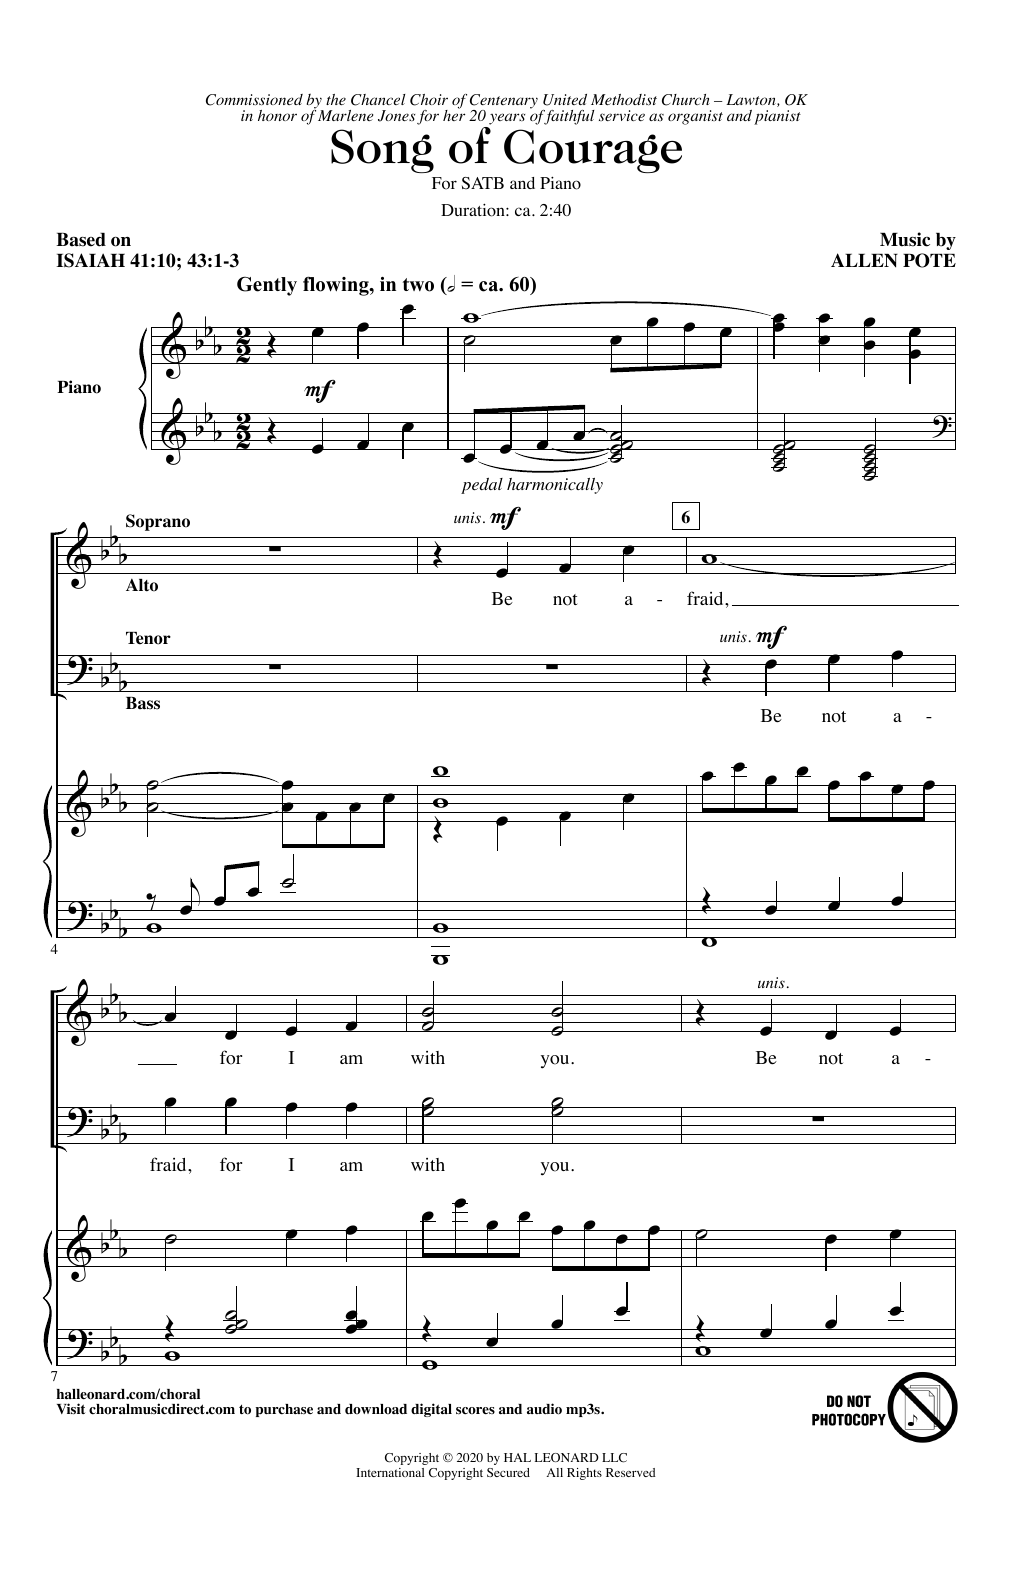 Download Allen Pote Song Of Courage Sheet Music